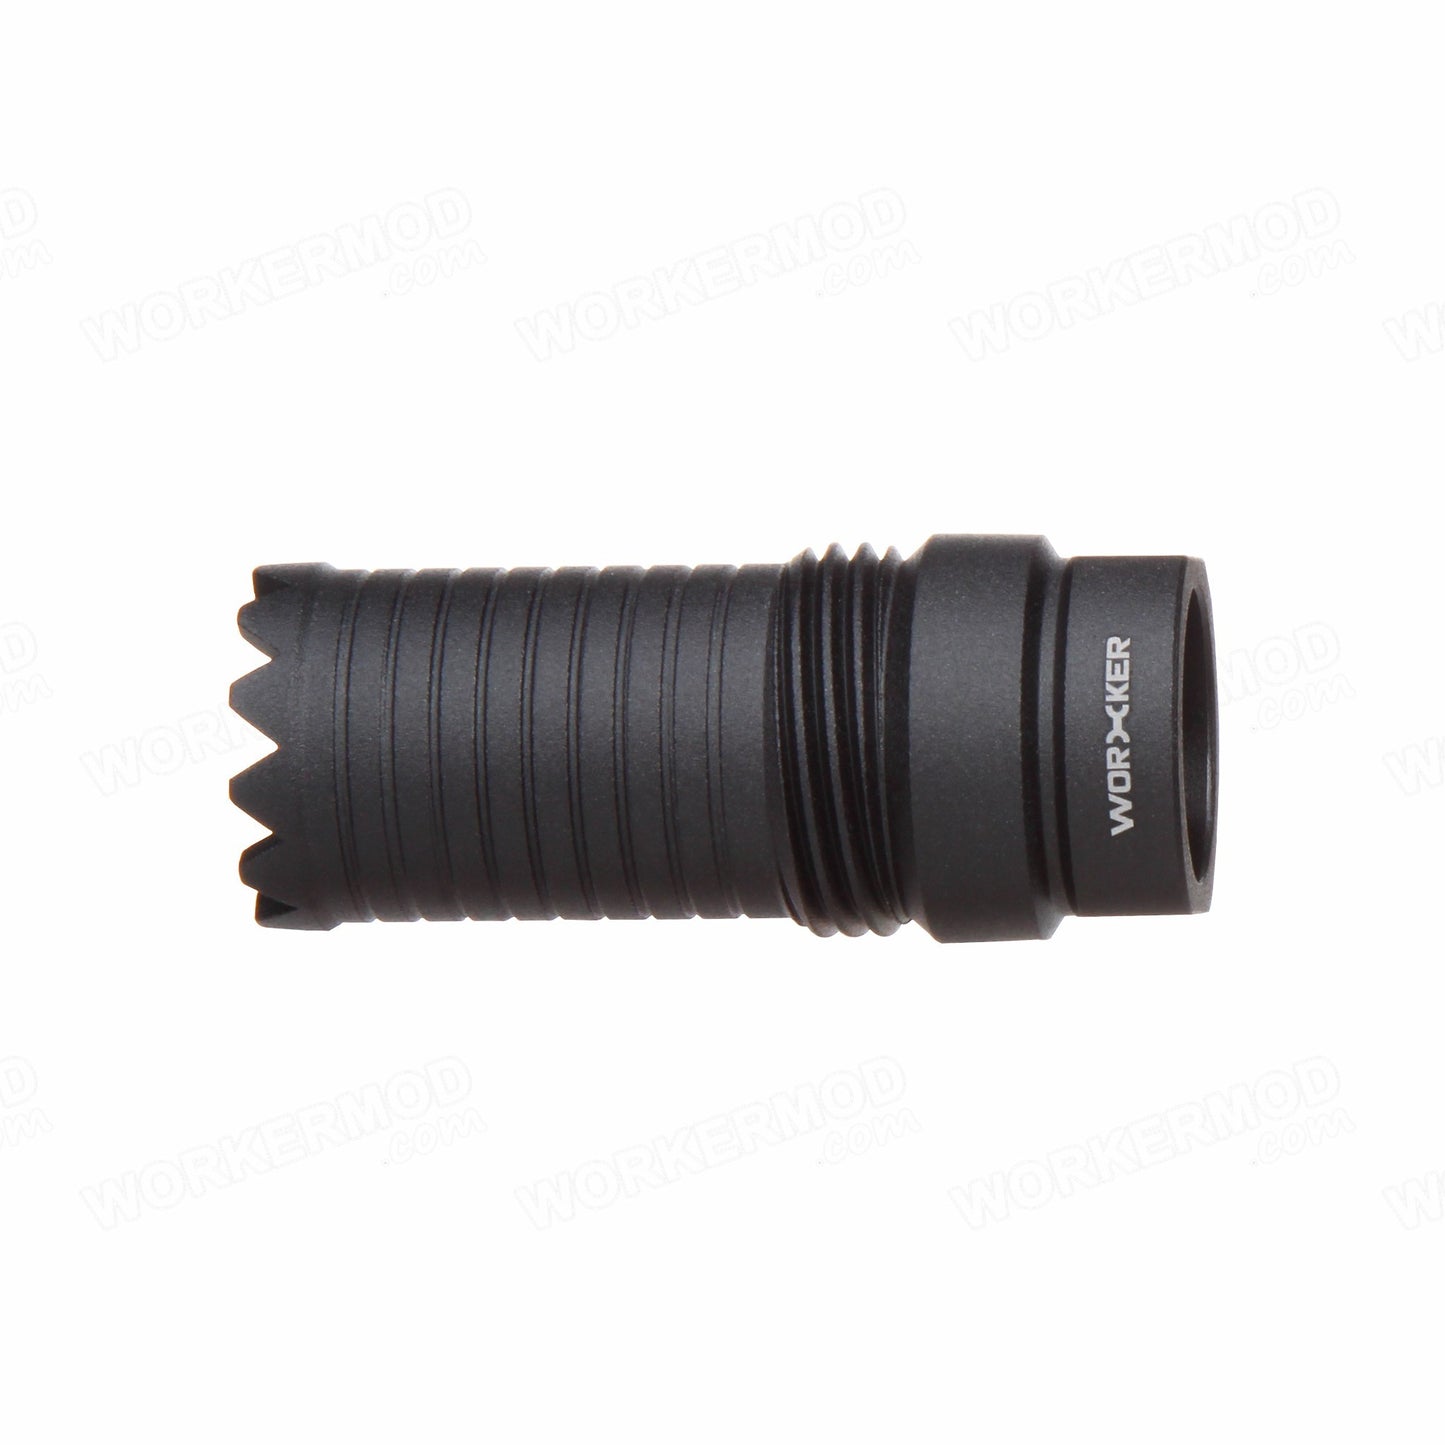 Worker Claymore Muzzle / Flash Hider (Threaded Connector)